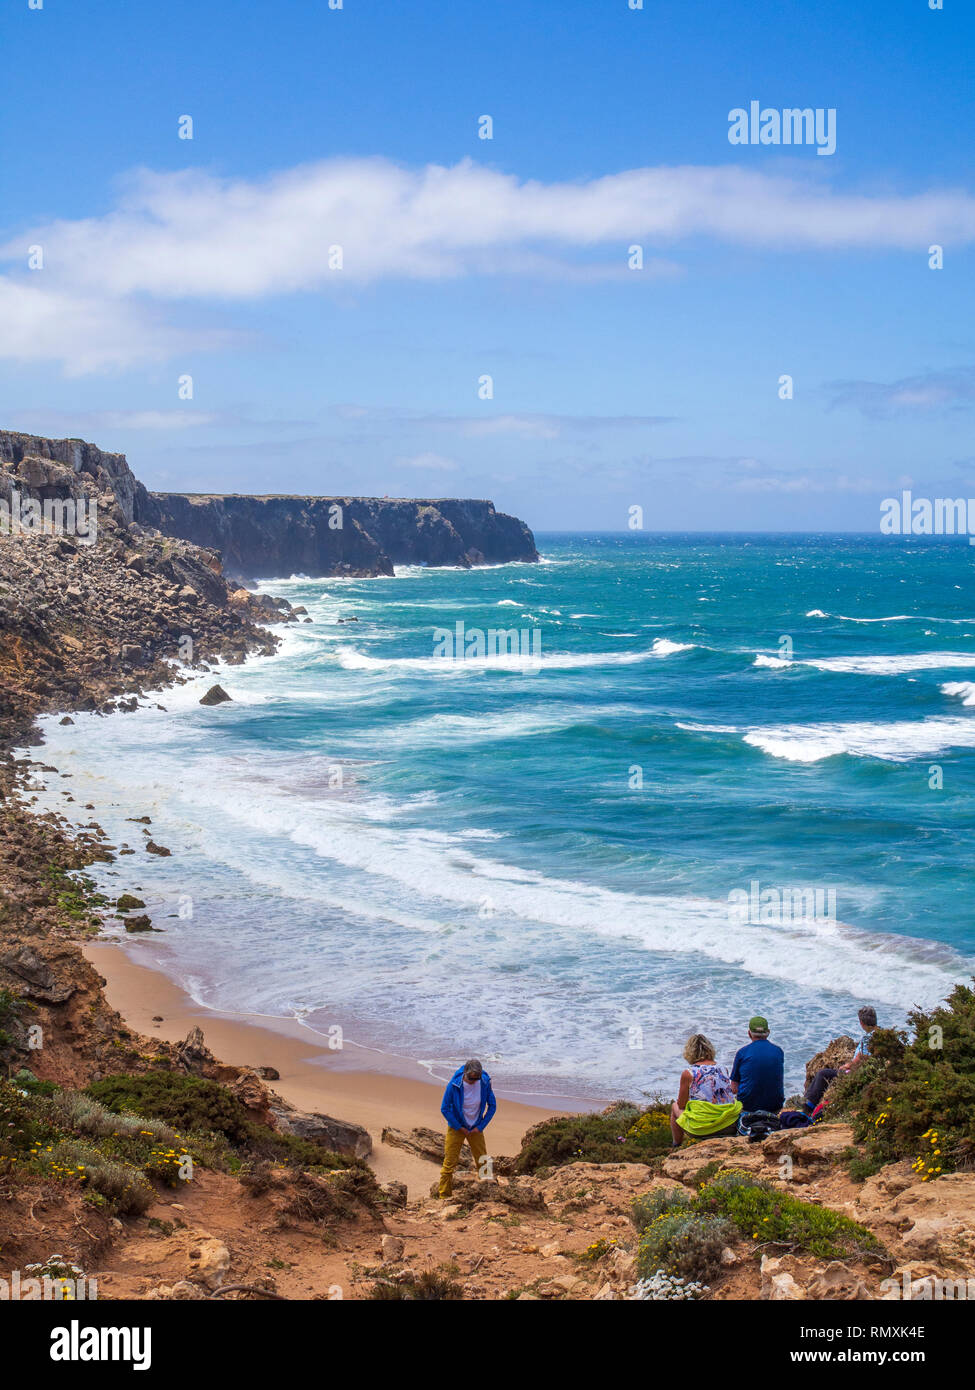 Trekkers enjoying a view of the coastline towards Cape St. Vincent, Portugal's most south westerly point, in the Algarve region. The area is part of t Stock Photo